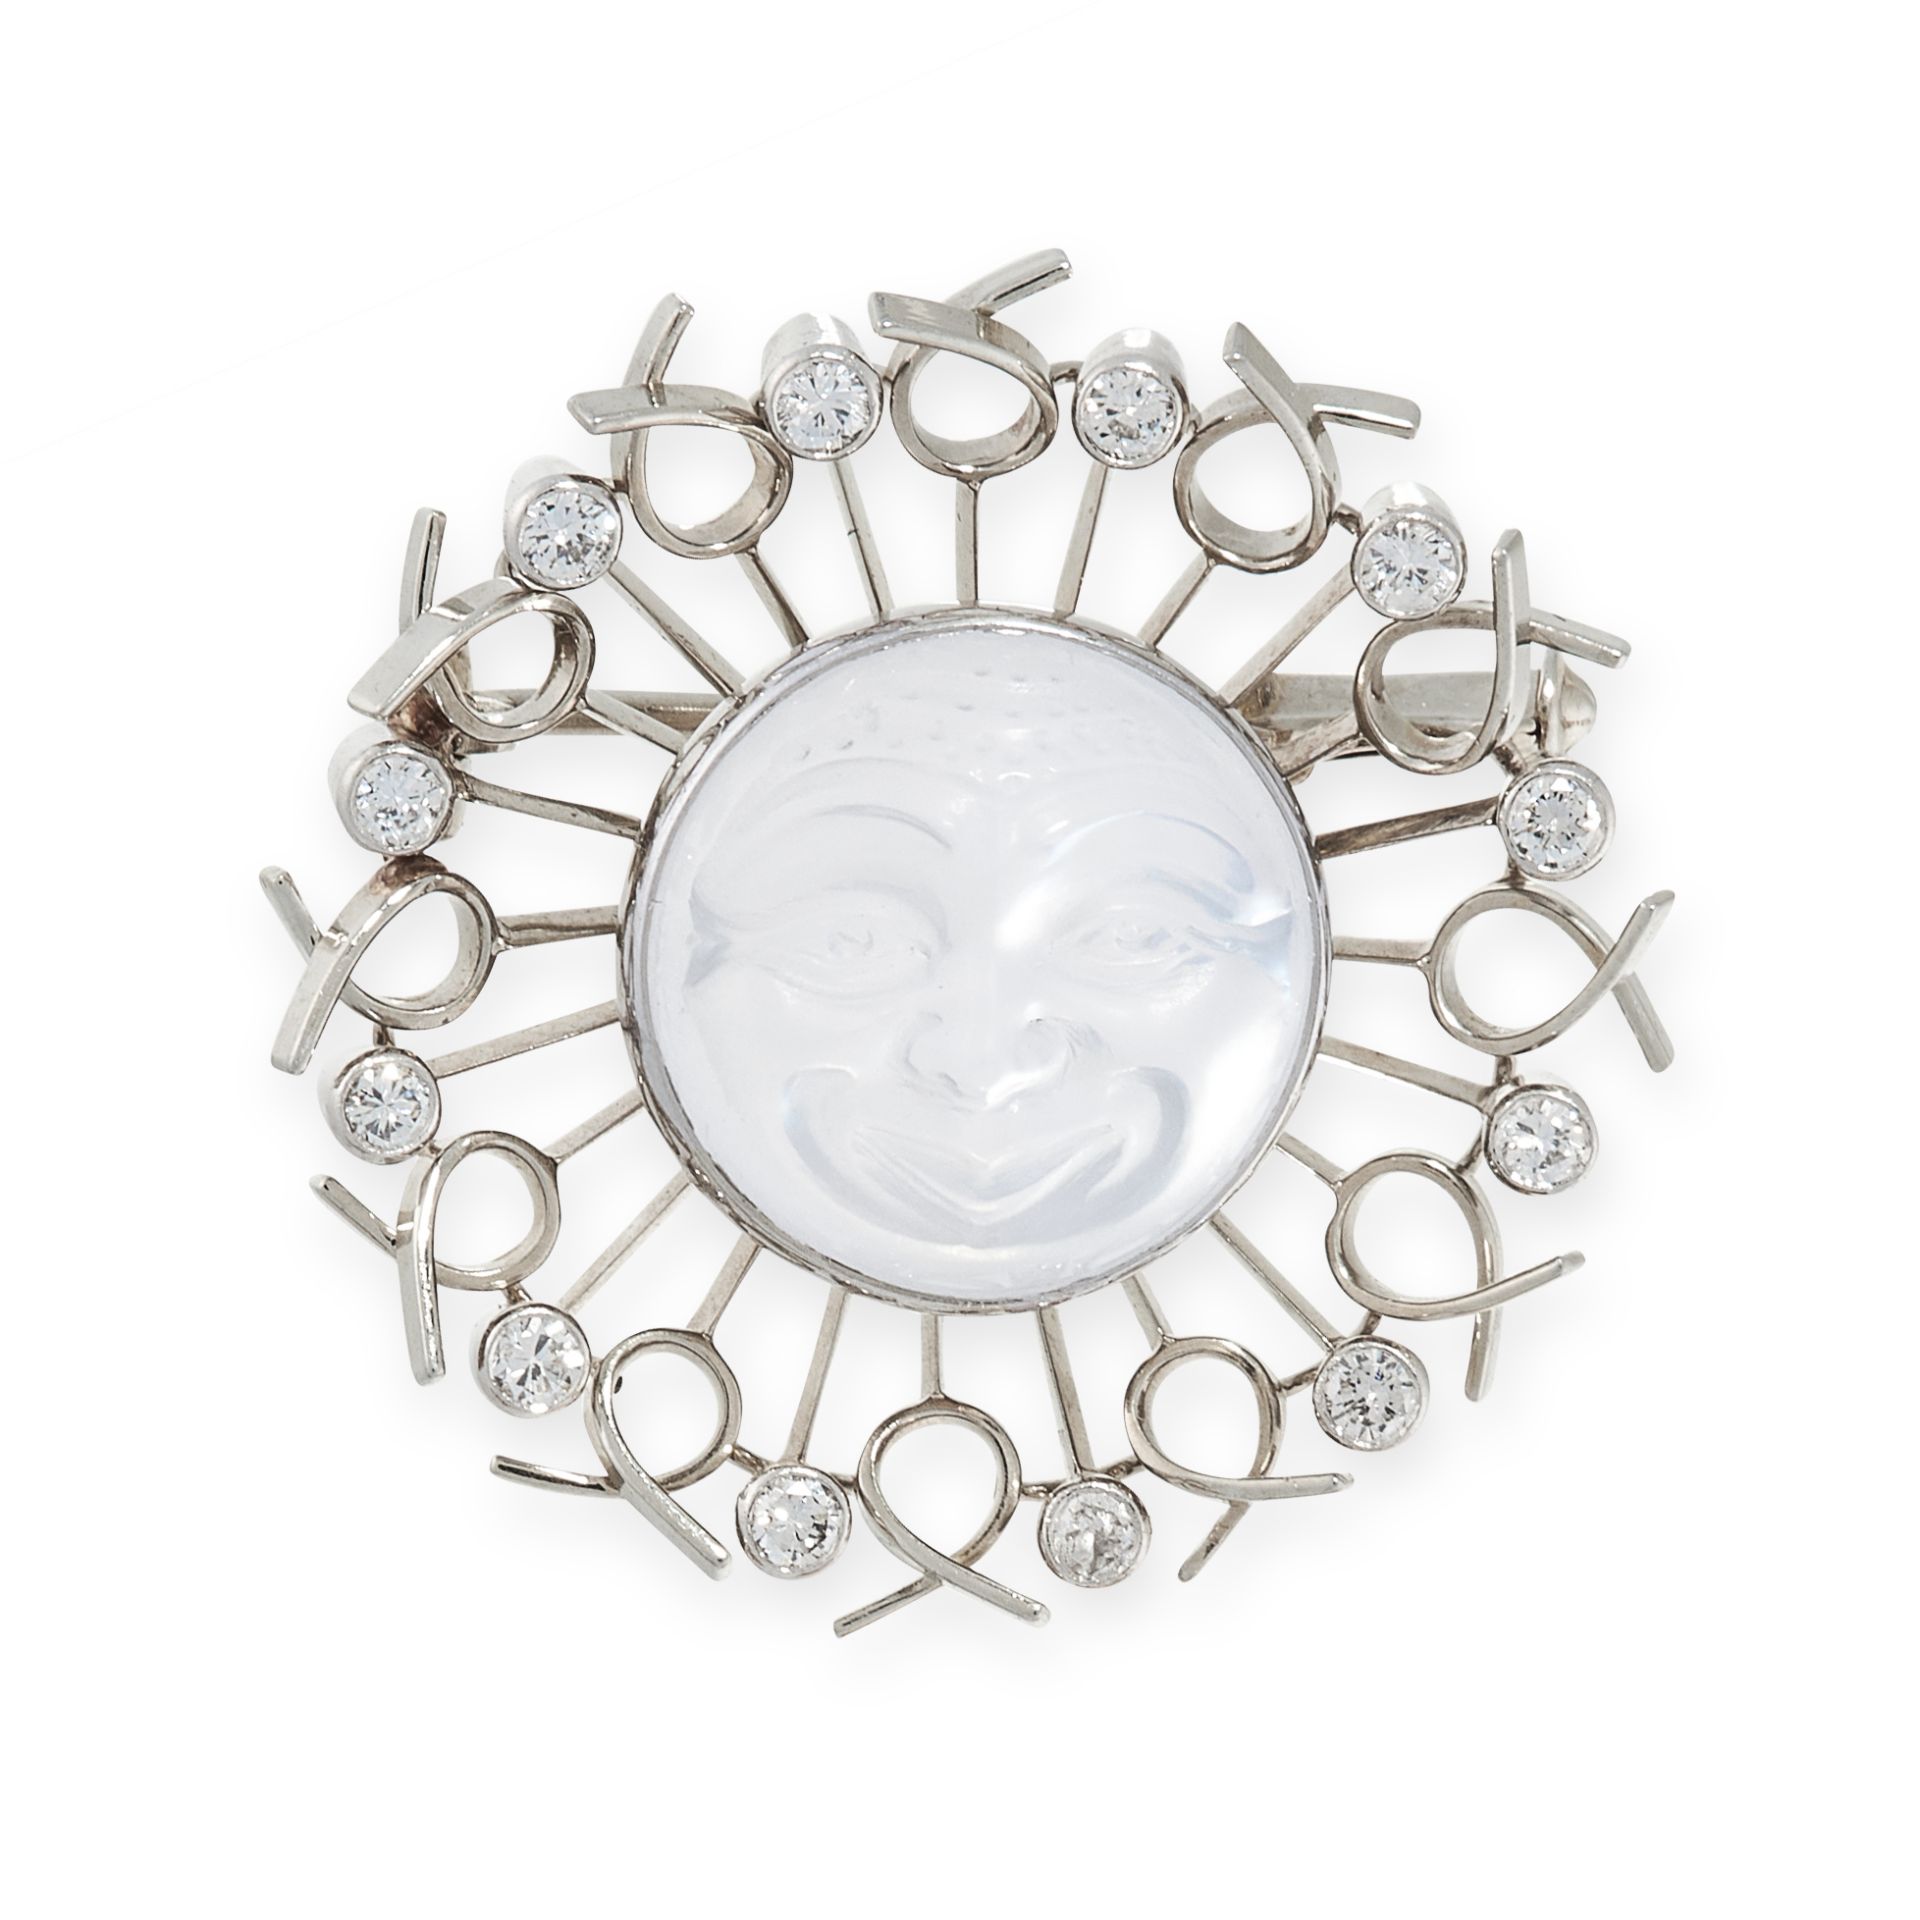 A MOONSTONE AND DIAMOND MAN IN THE MOON BROOCH in 18ct gold, set with a circular carved moonstone